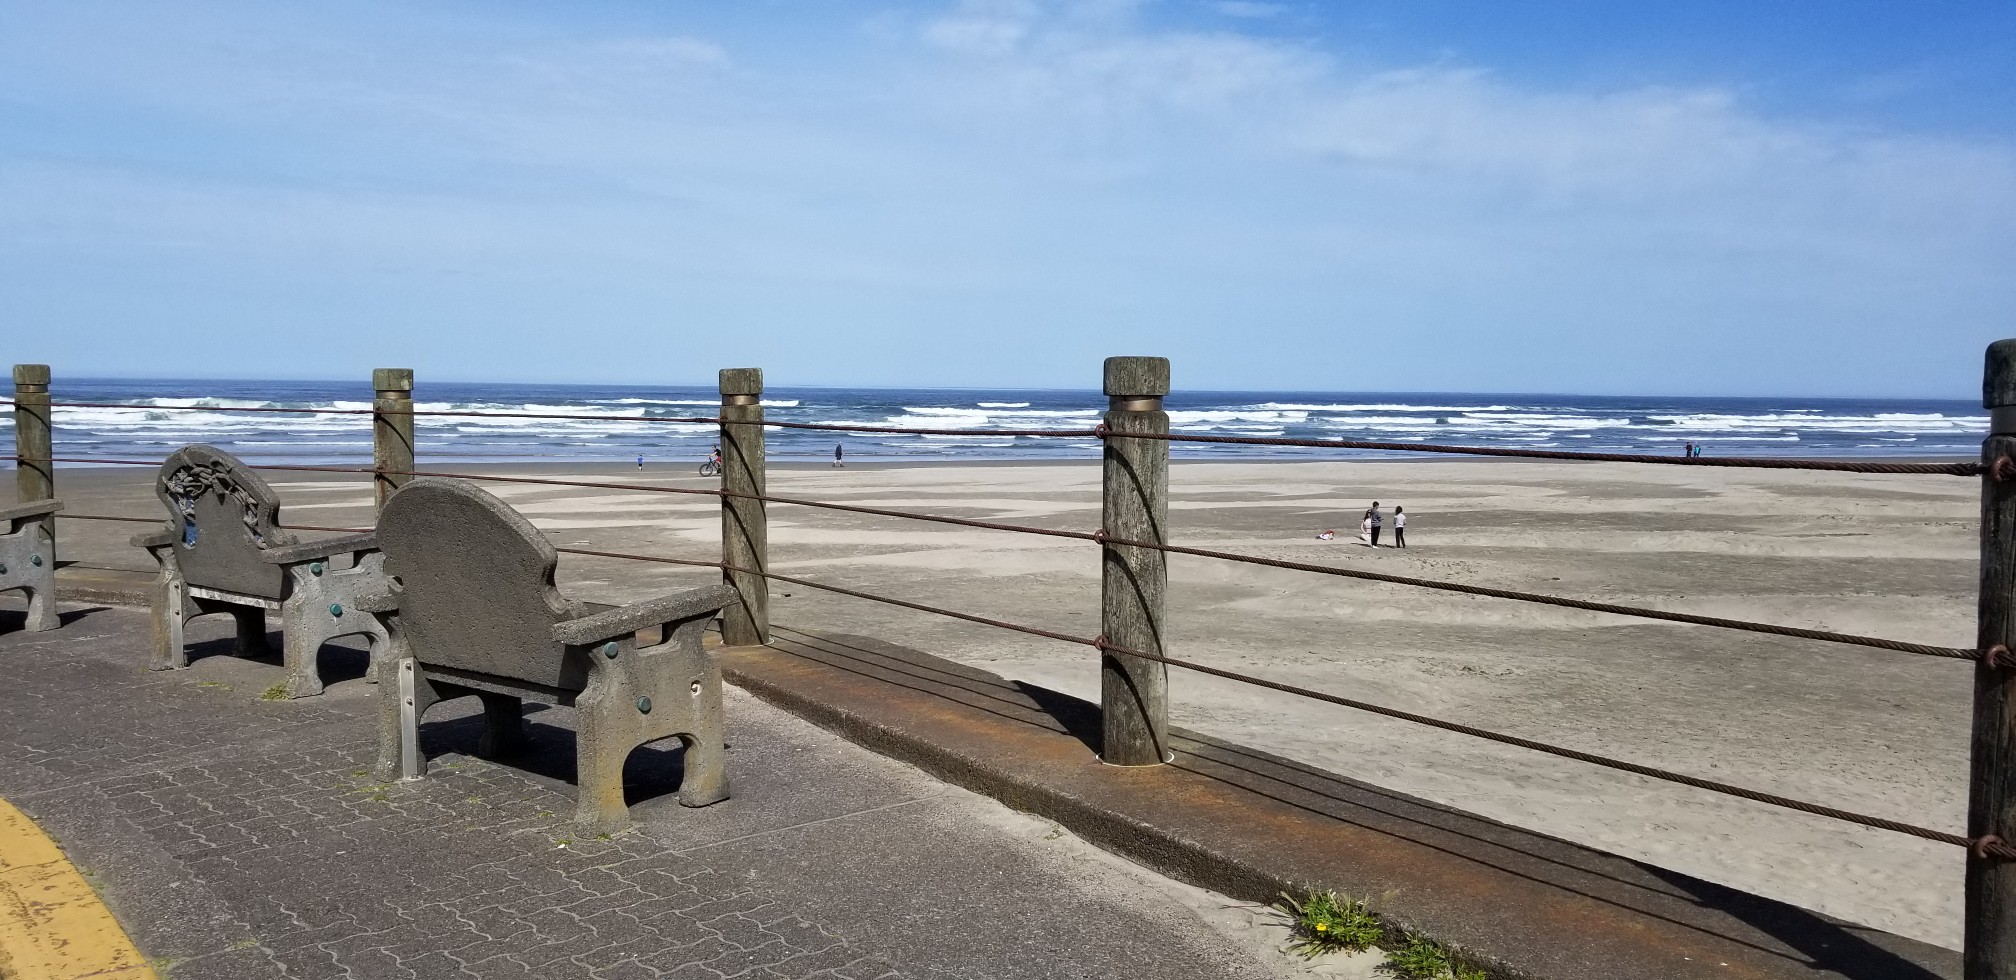 benches with a view of the ocean